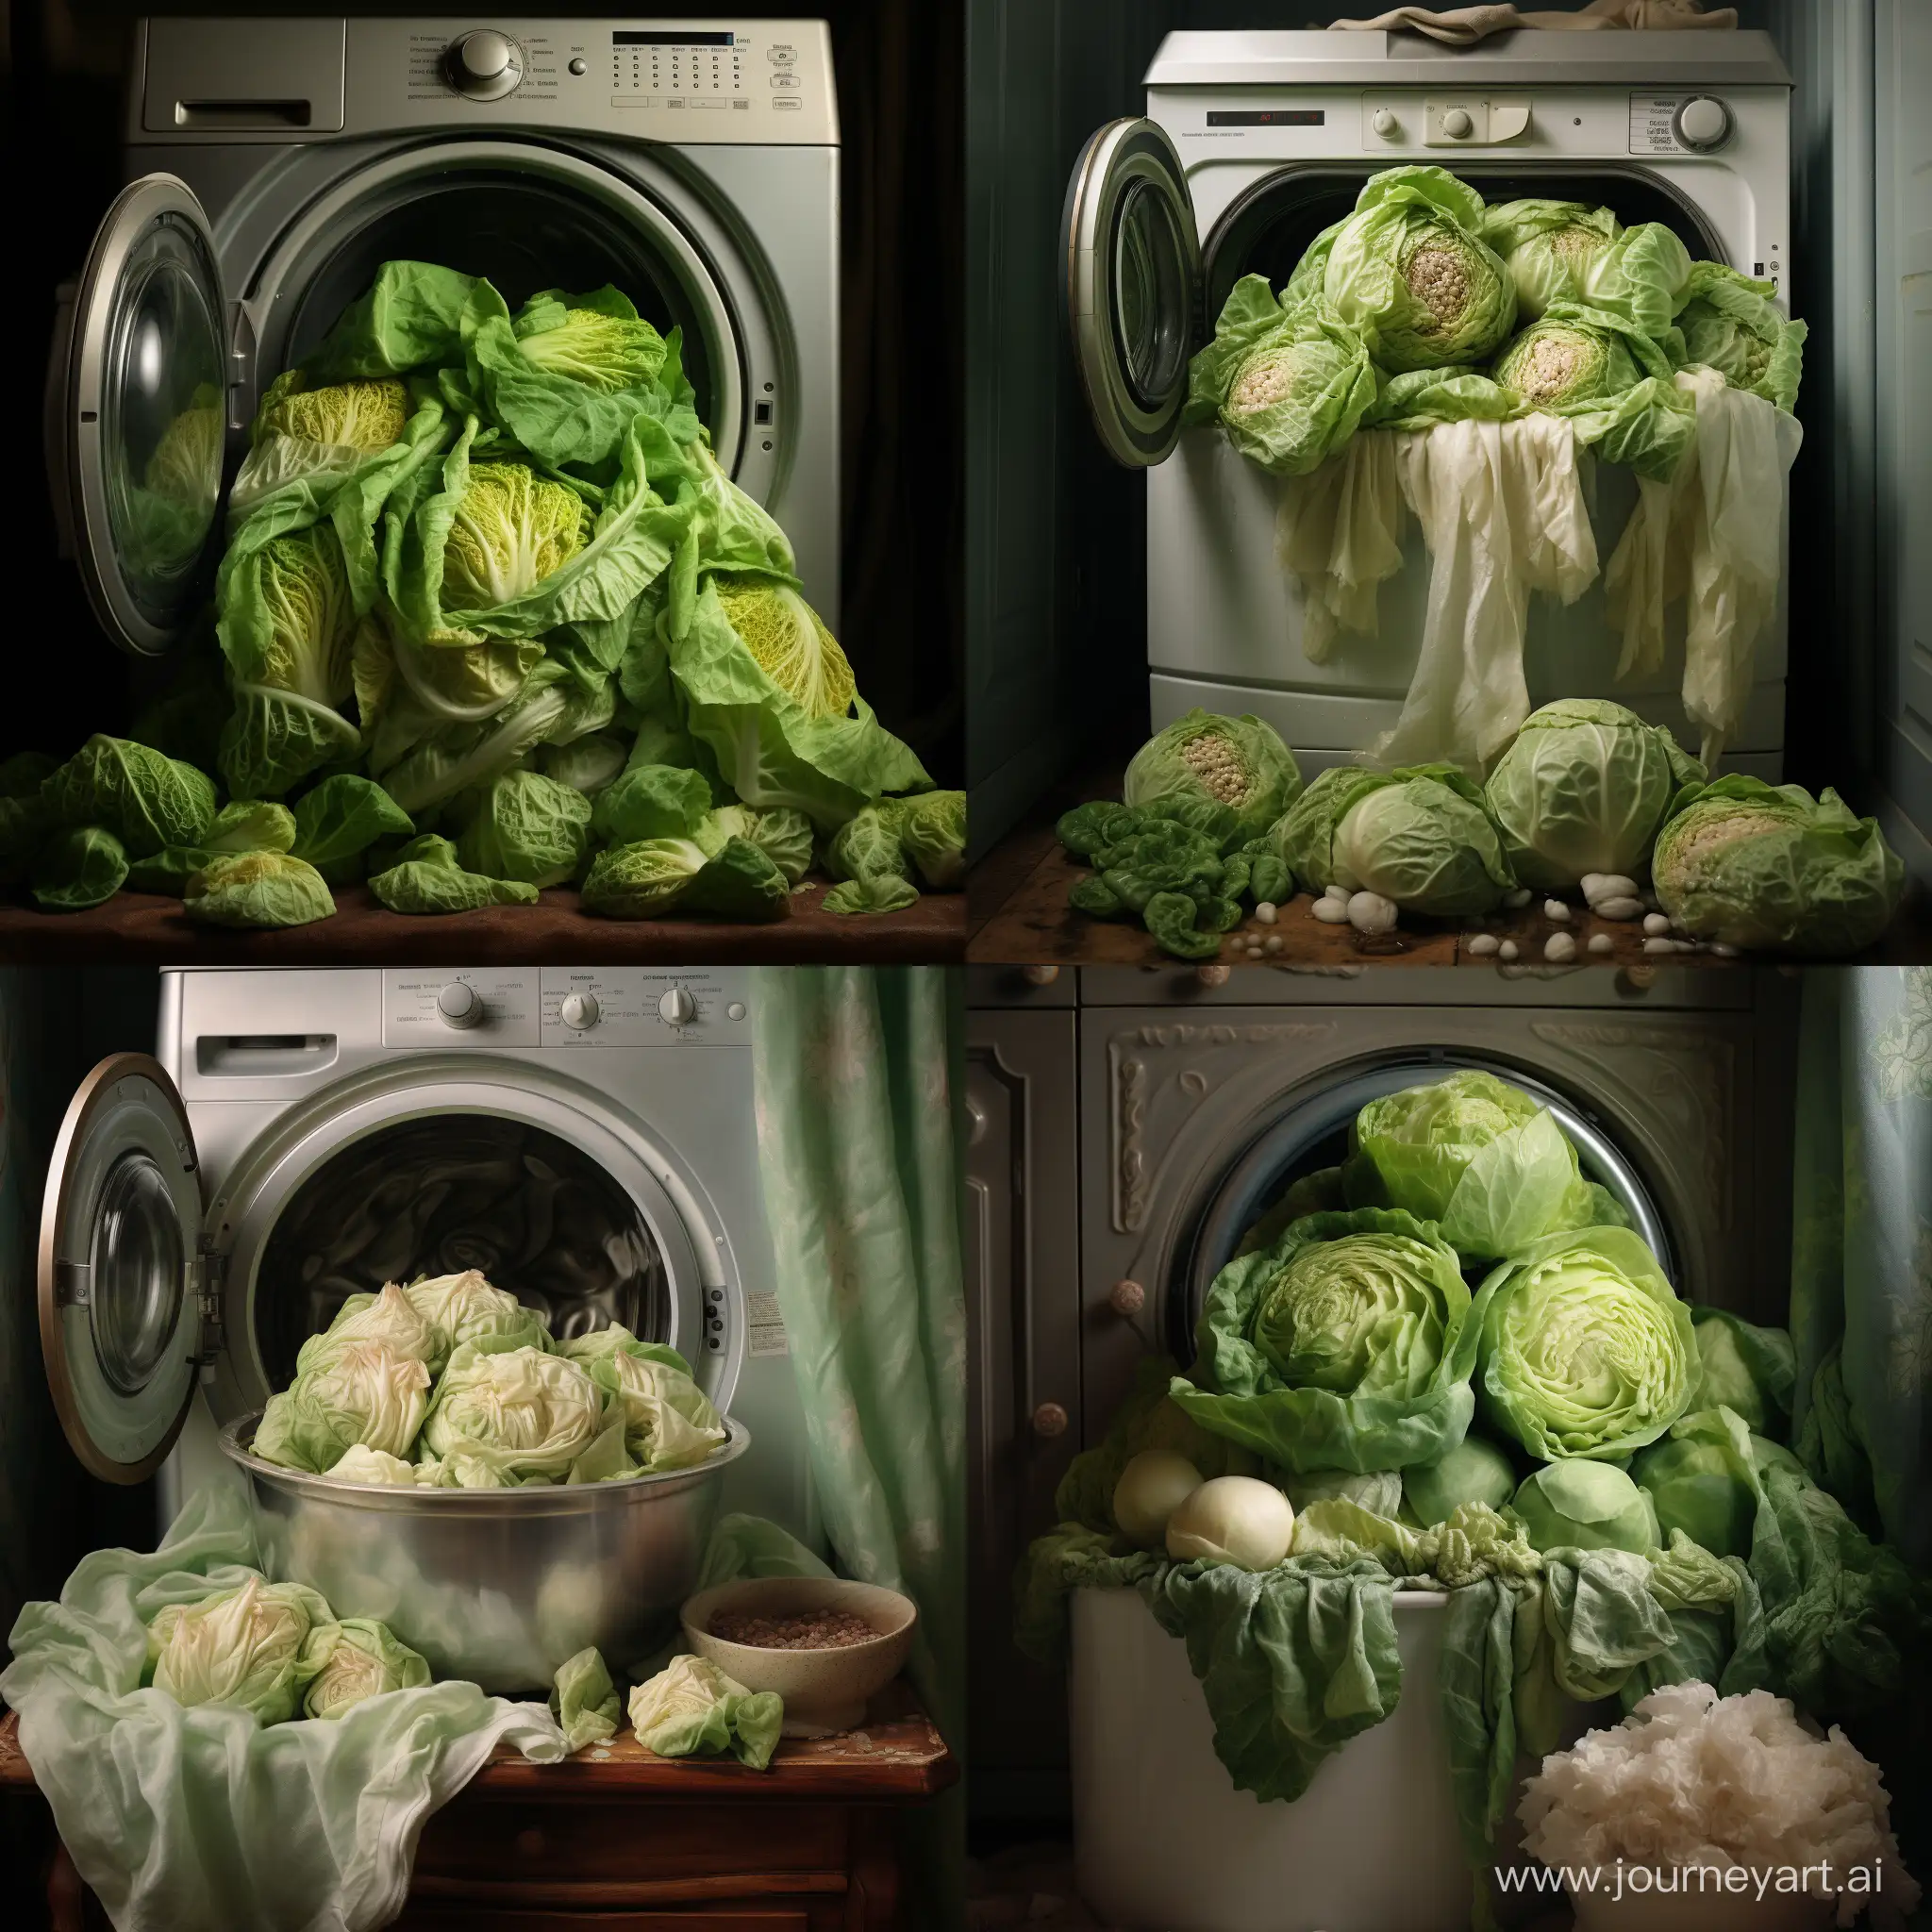 Vibrant-Cabbage-Spin-in-Square-Washing-Machine